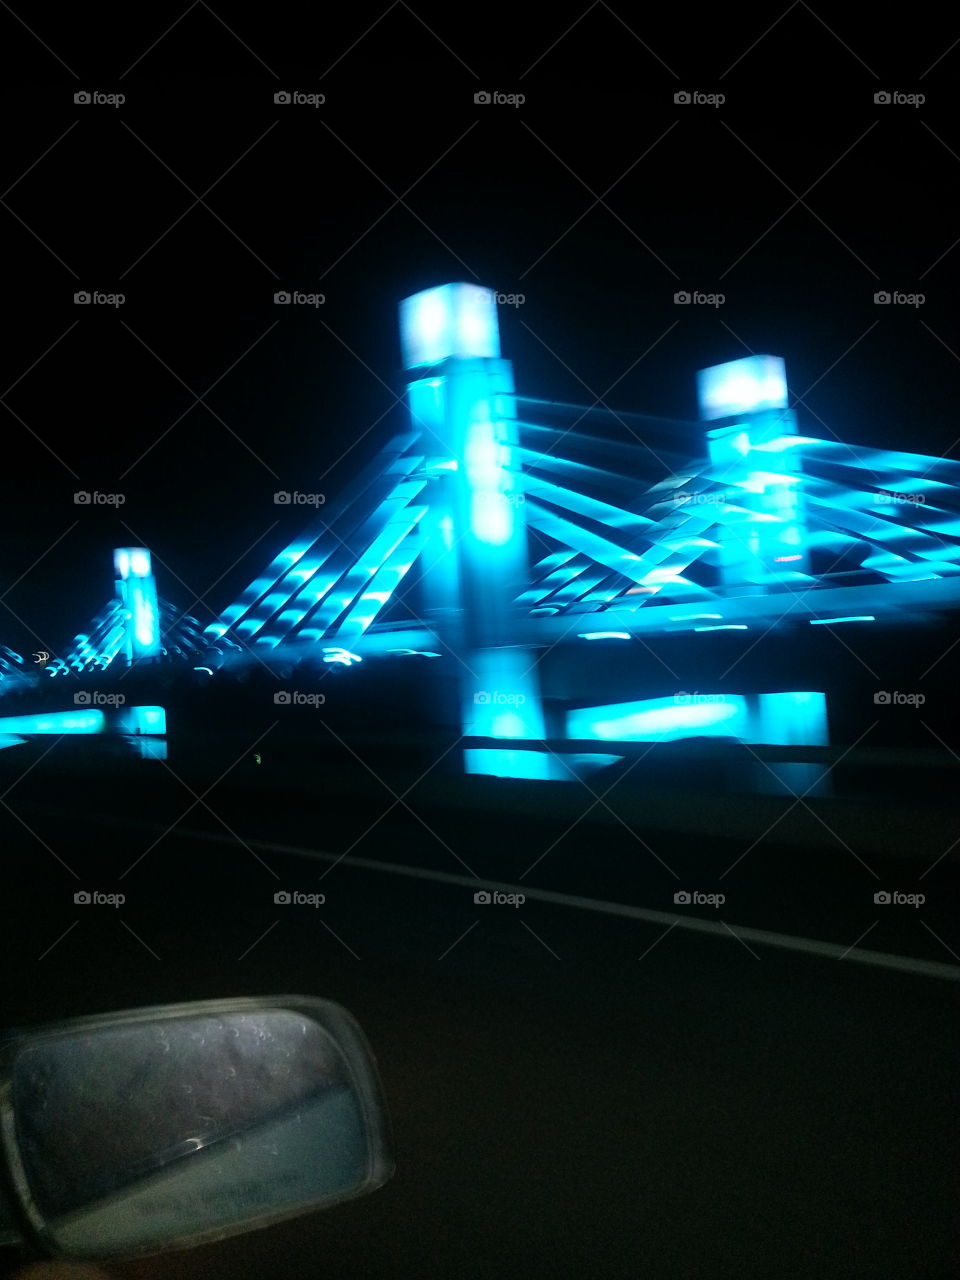 blue. this new bridge by baylor seems to be lit a different color each time I pass